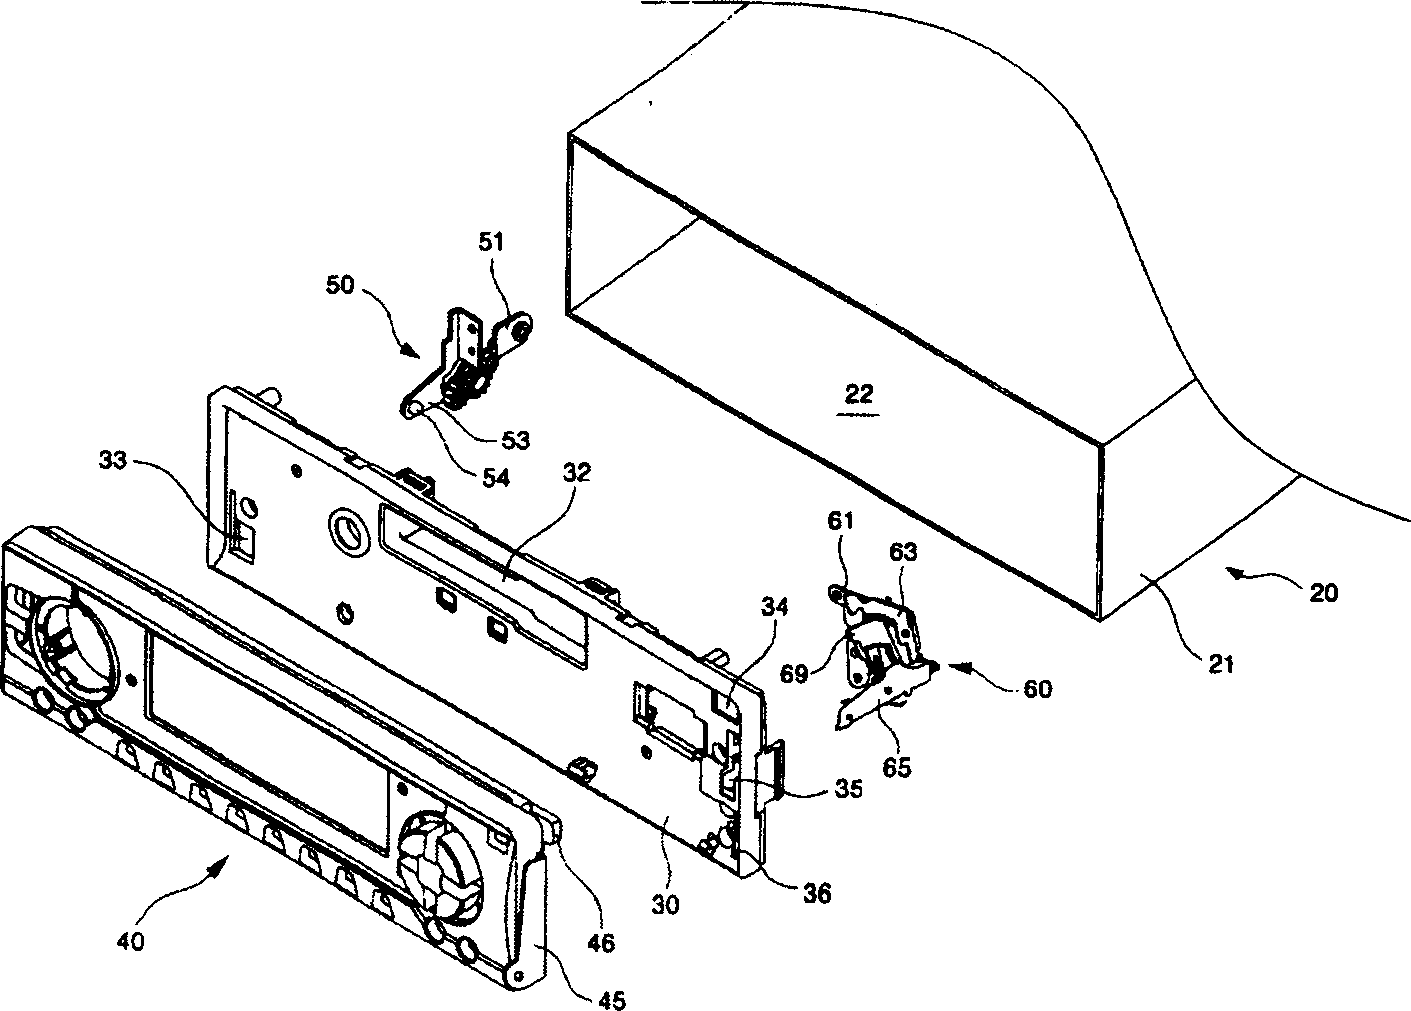 Lock-stopping hinge assembly and sound apparatus using same to realize lower-flicking mode